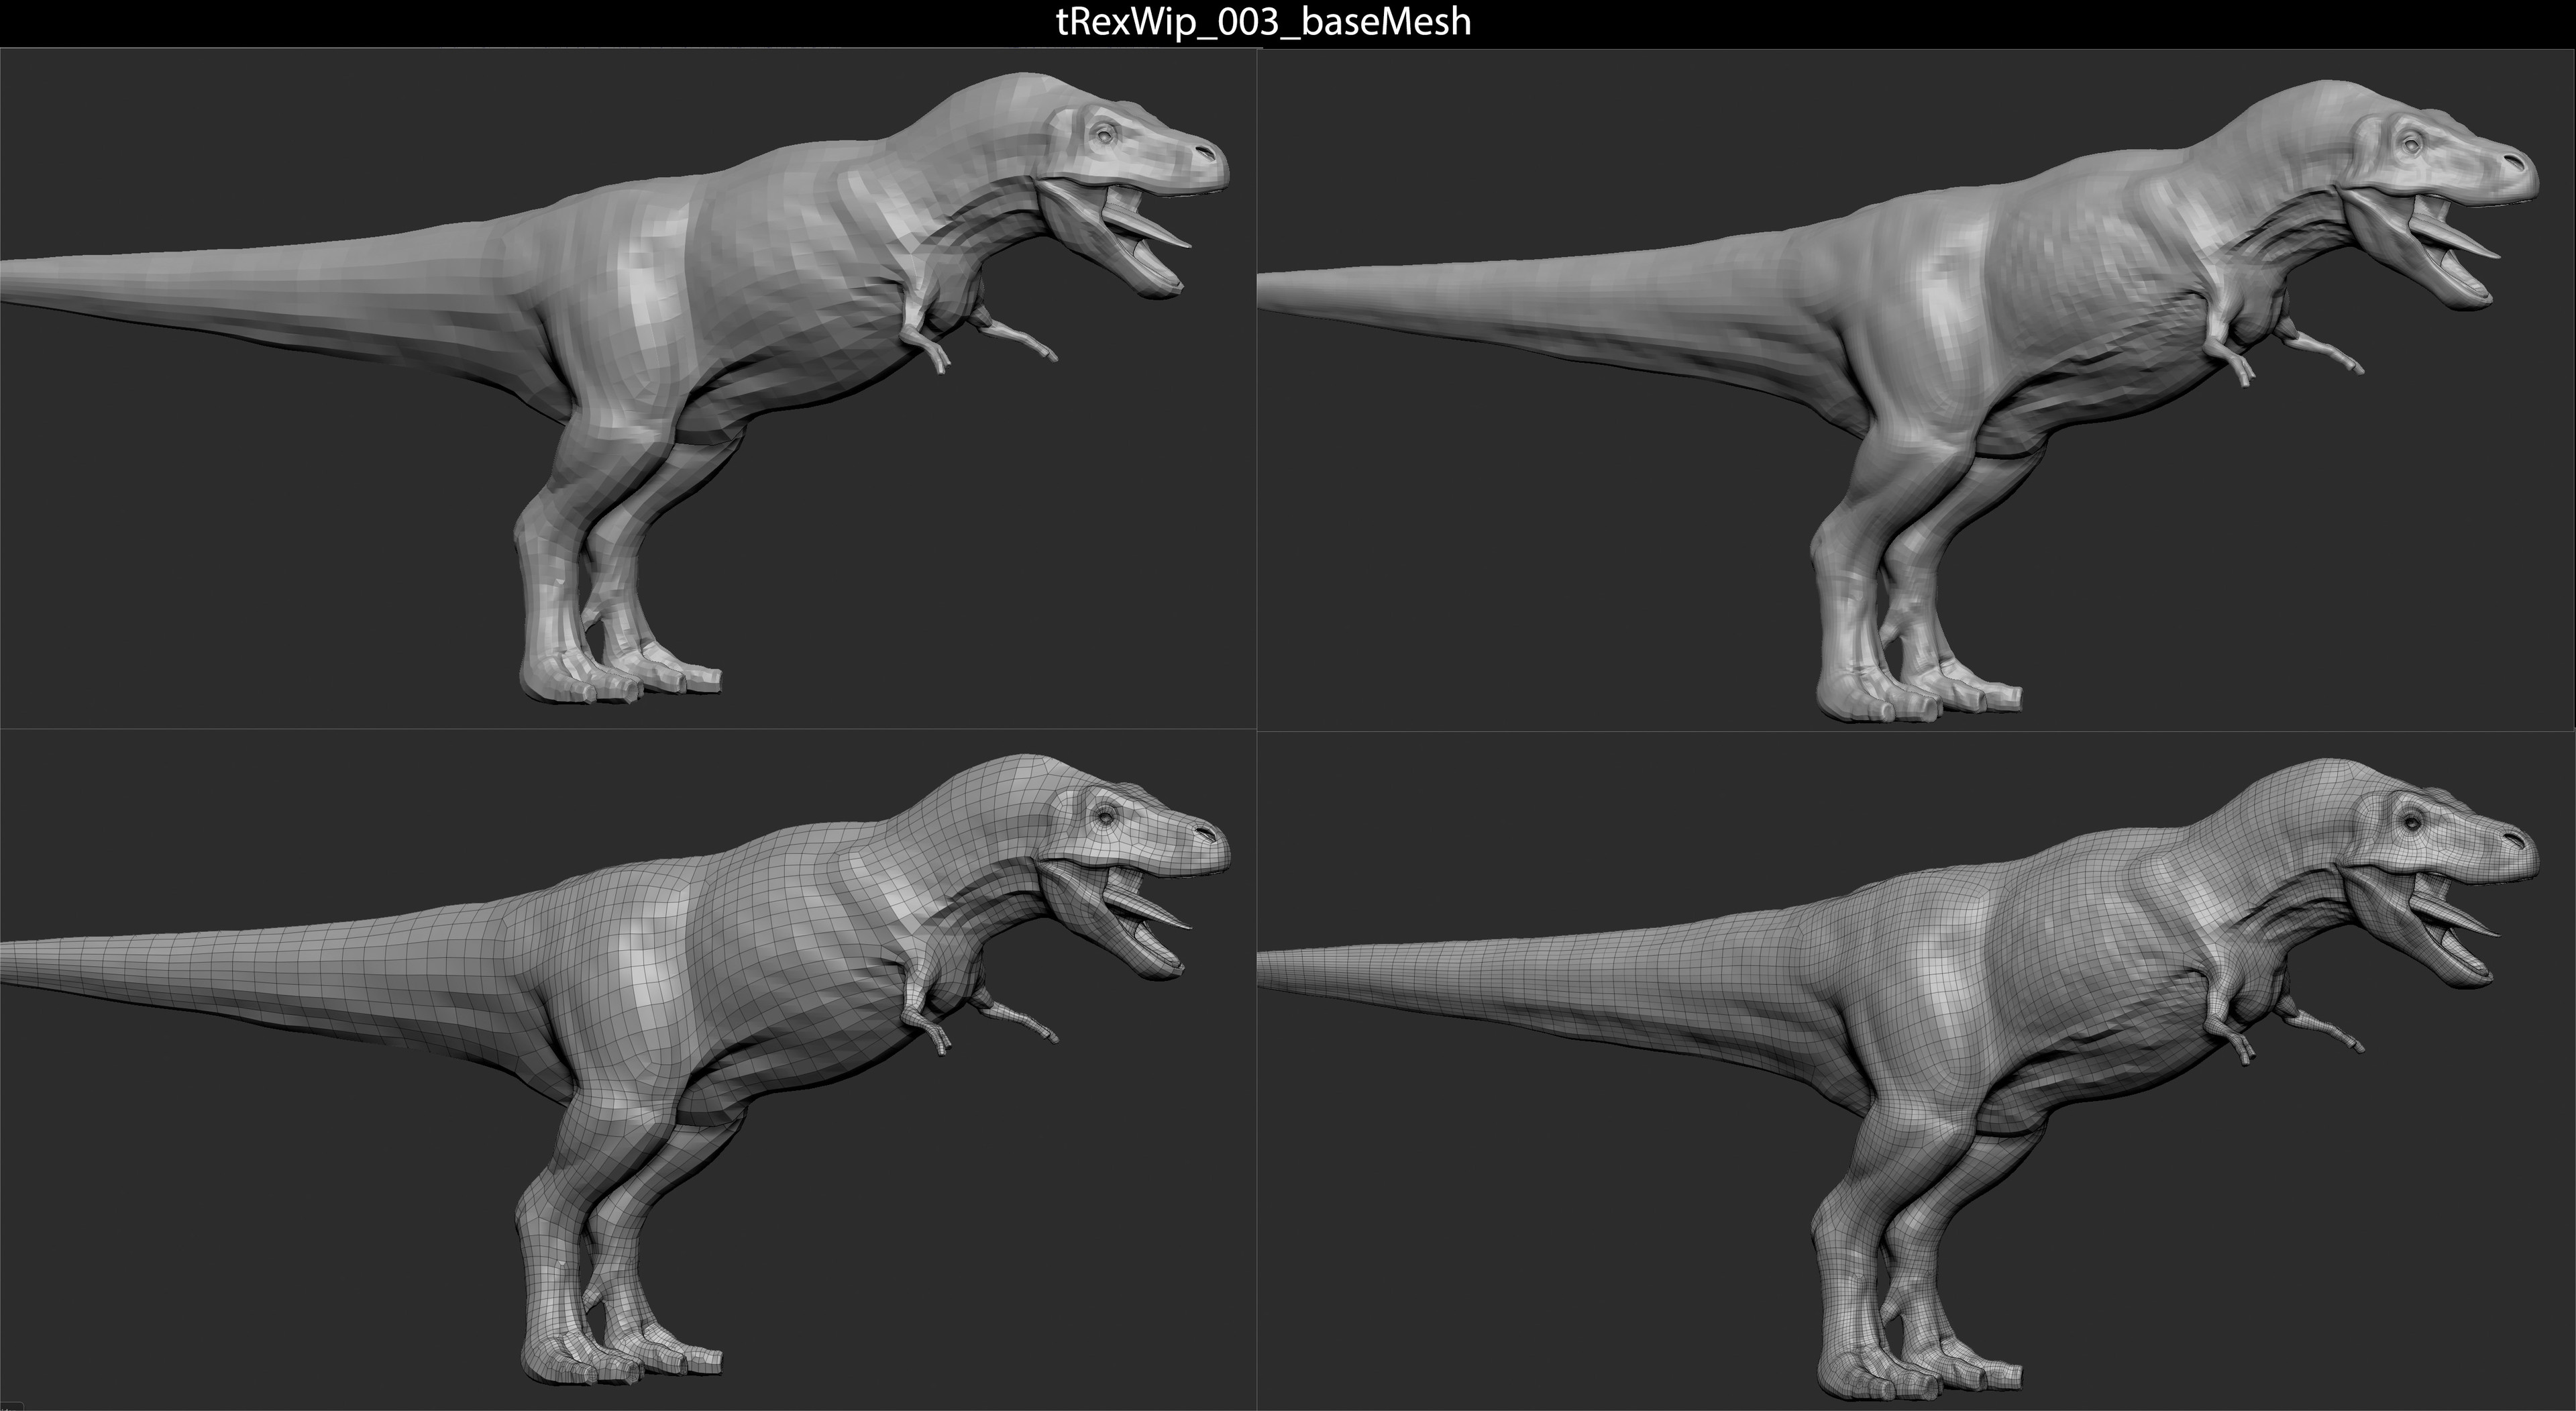 Low def model for rigging on the left. High def model for muscle and skin deformation on the right.